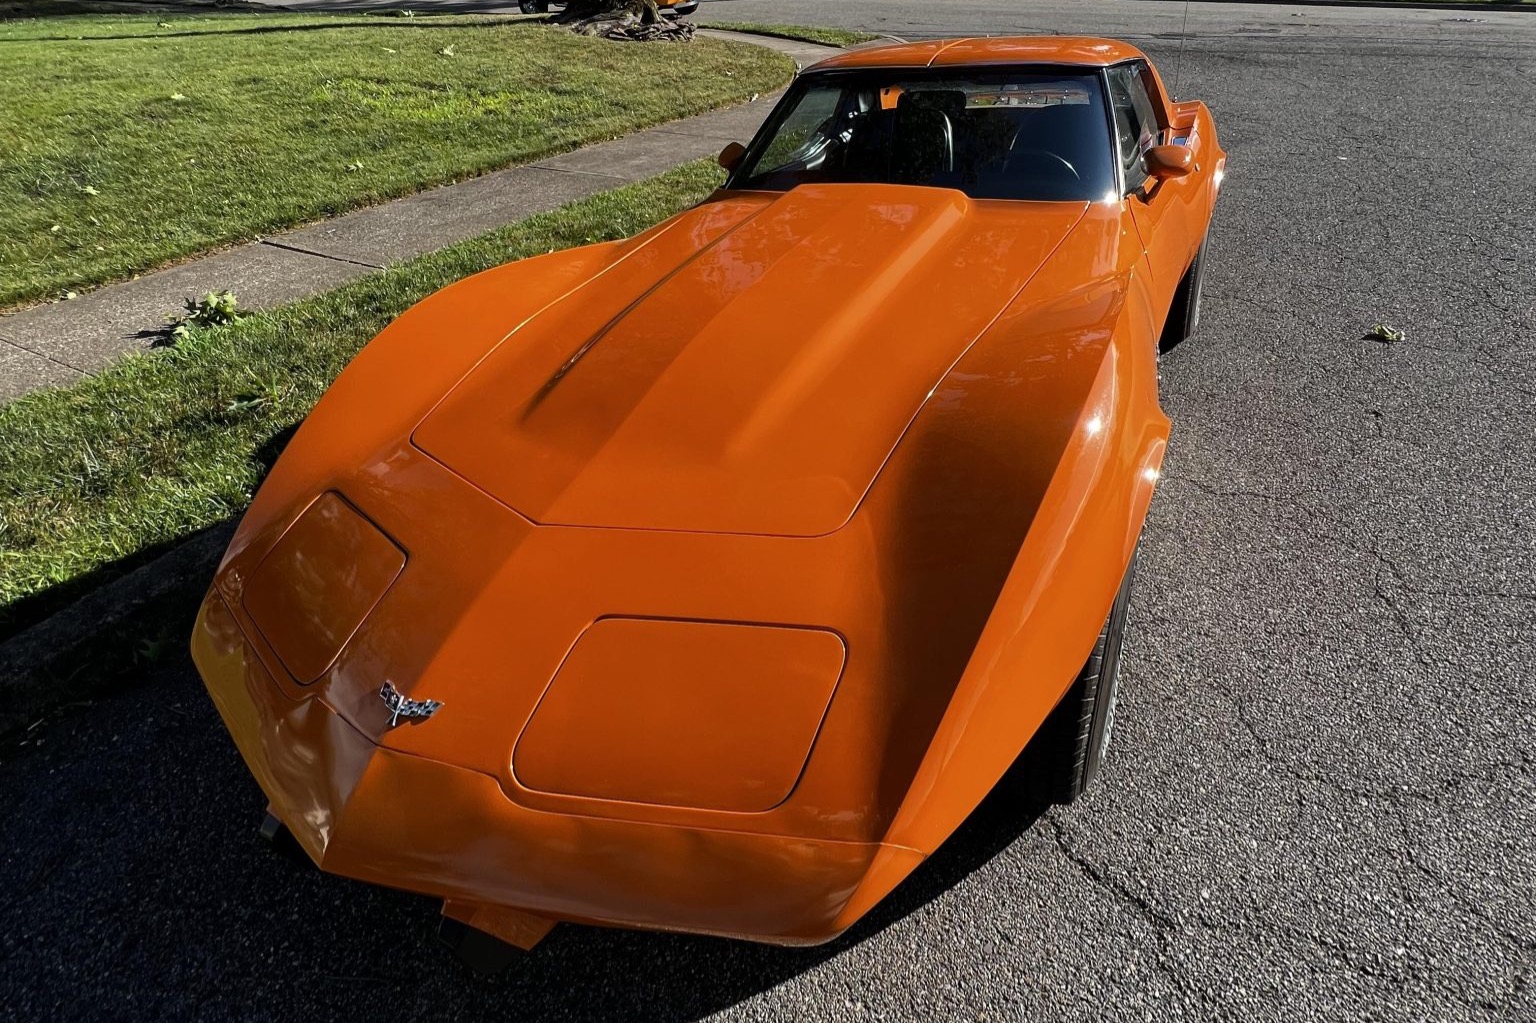 Used 1977 Chevrolet Corvette Coupe Review